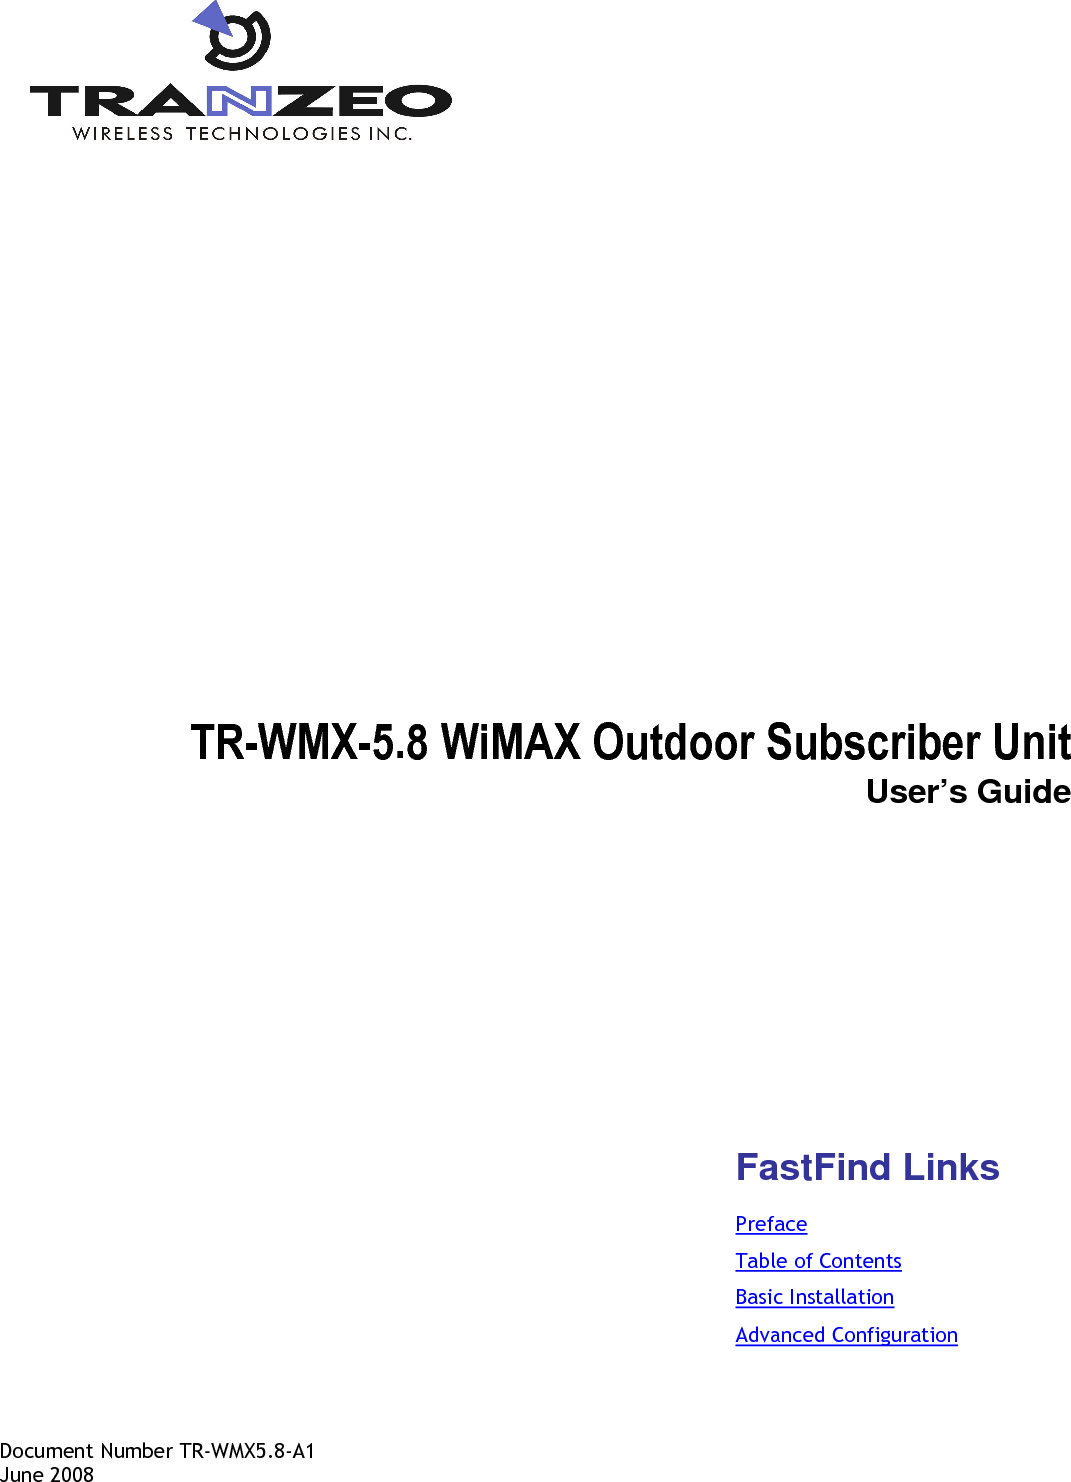   TR-WMX-5.8 WiMAX Outdoor Subscriber Unit User’s Guide        Document Number TR-WMX5.8-A1 June 2008 FastFind Links Preface Table of Contents Basic Installation Advanced Configuration 